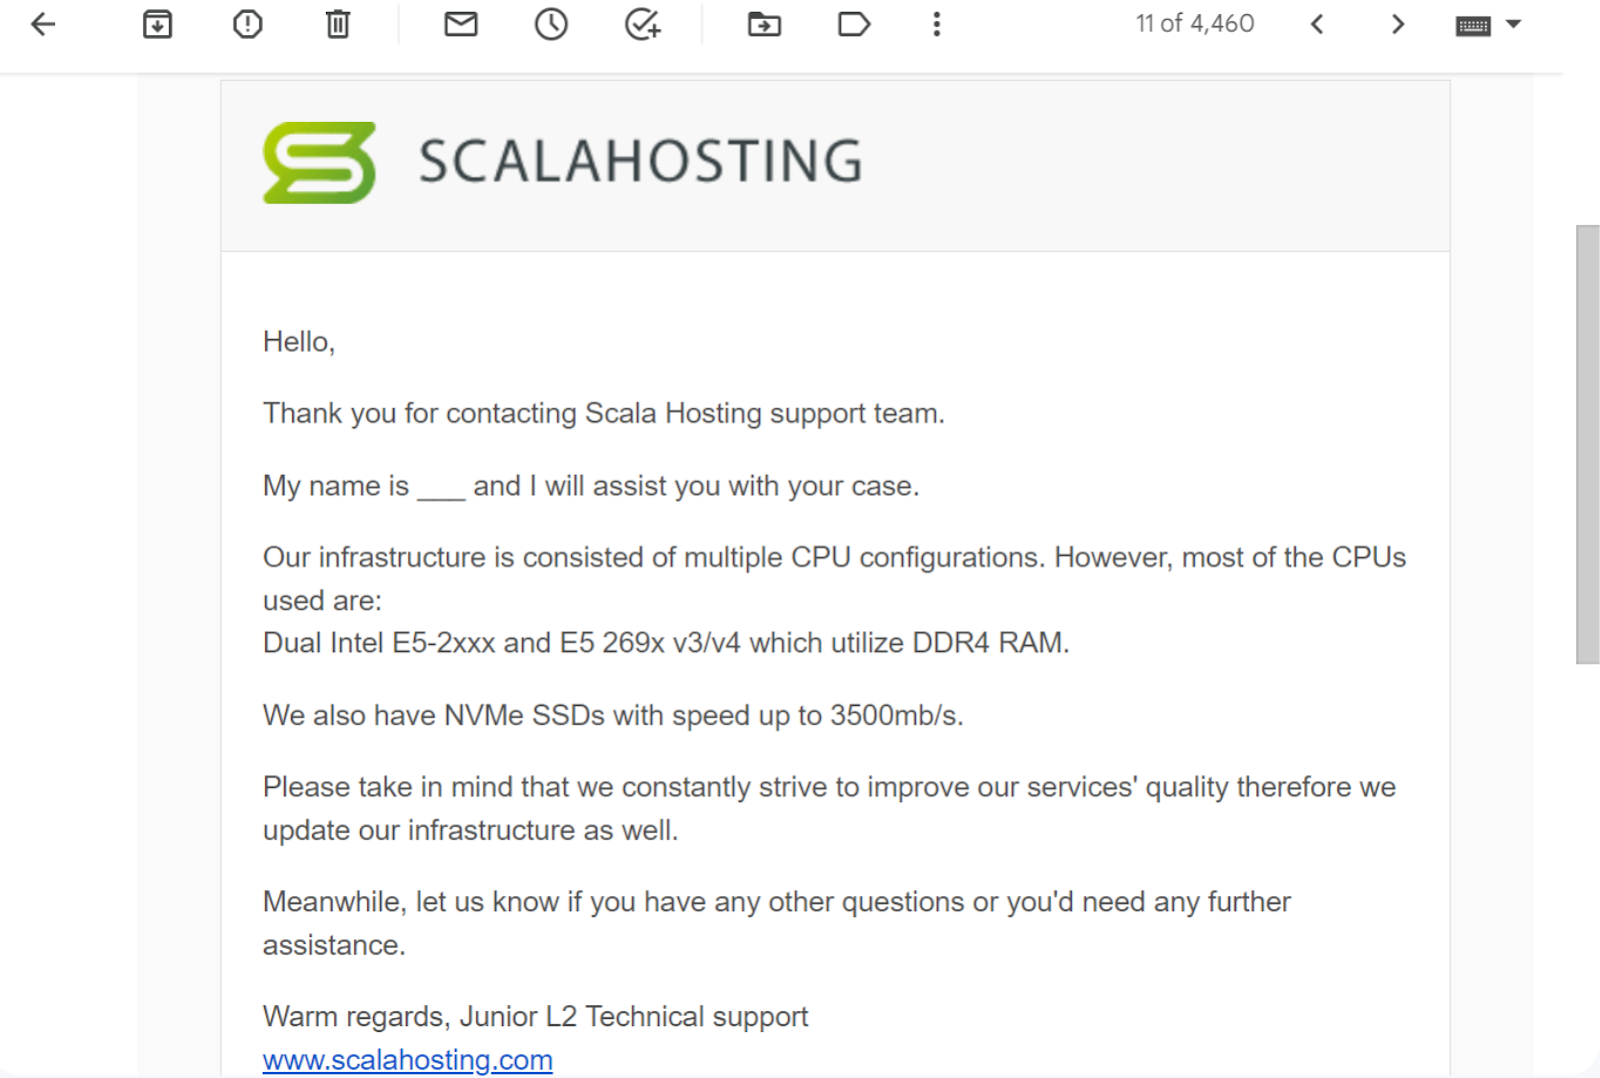 Scala Hosting Email Ticket Support